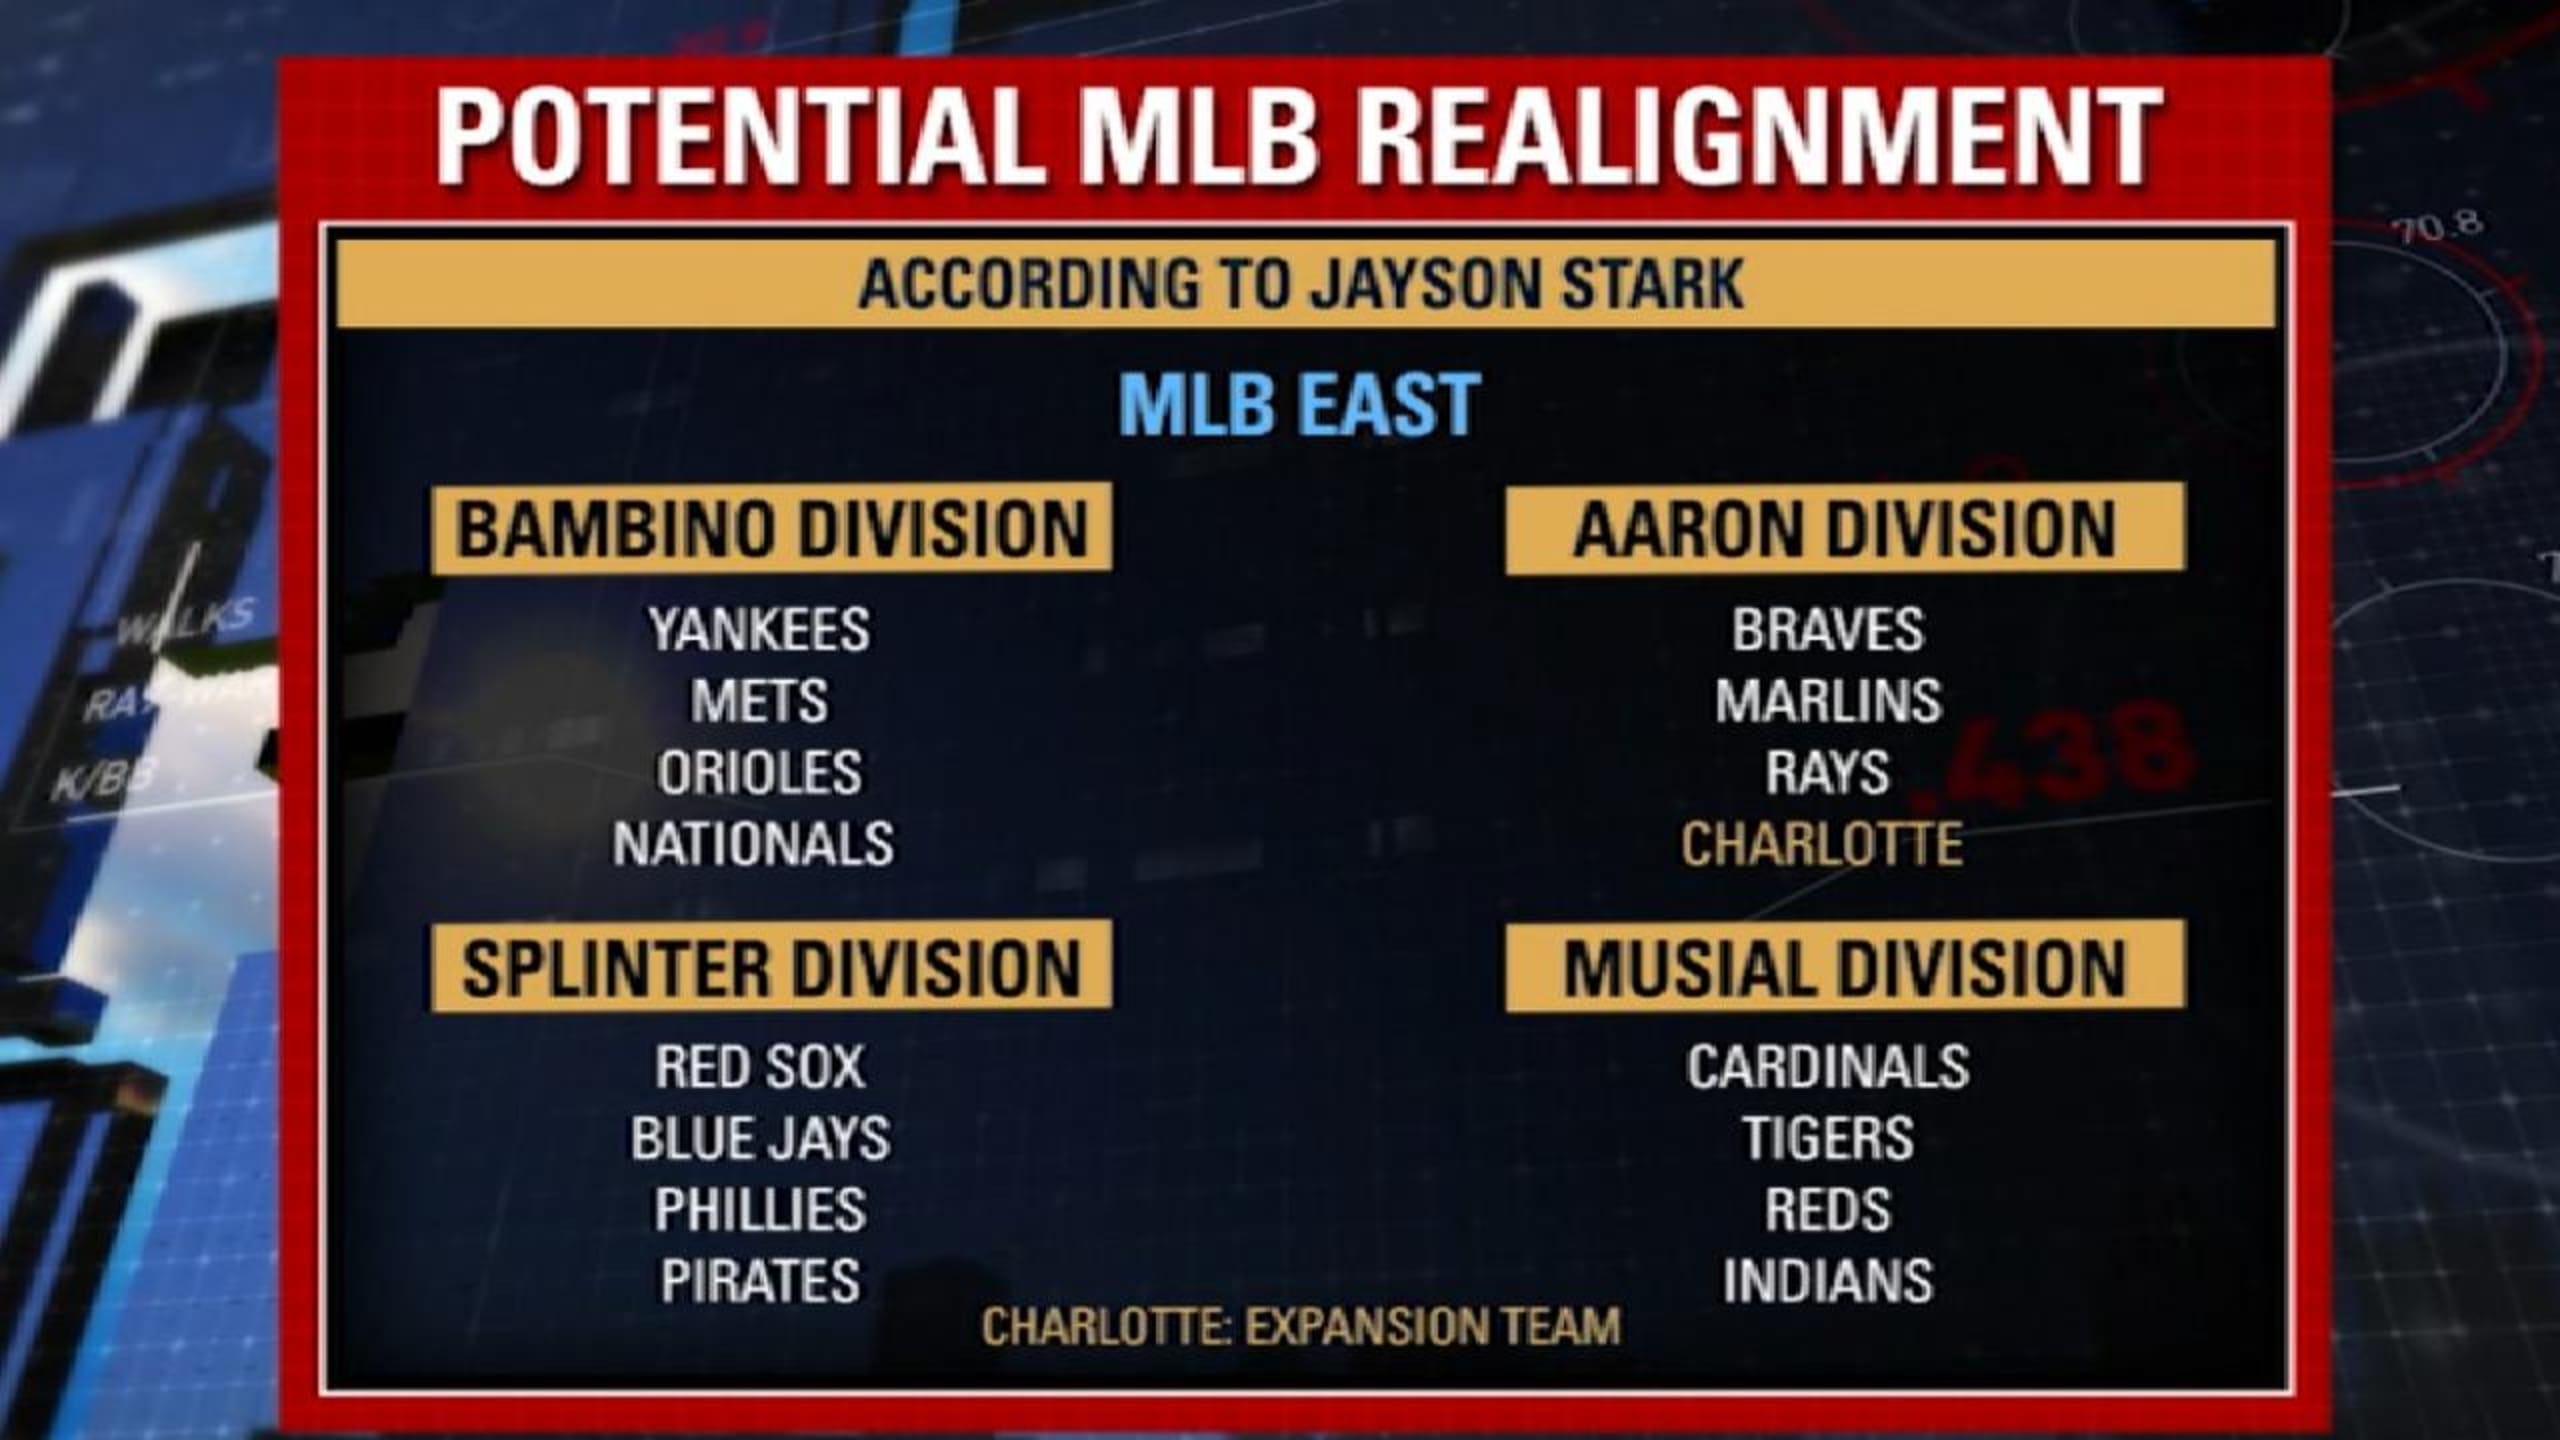 MLB Now Realignment of 32 teams